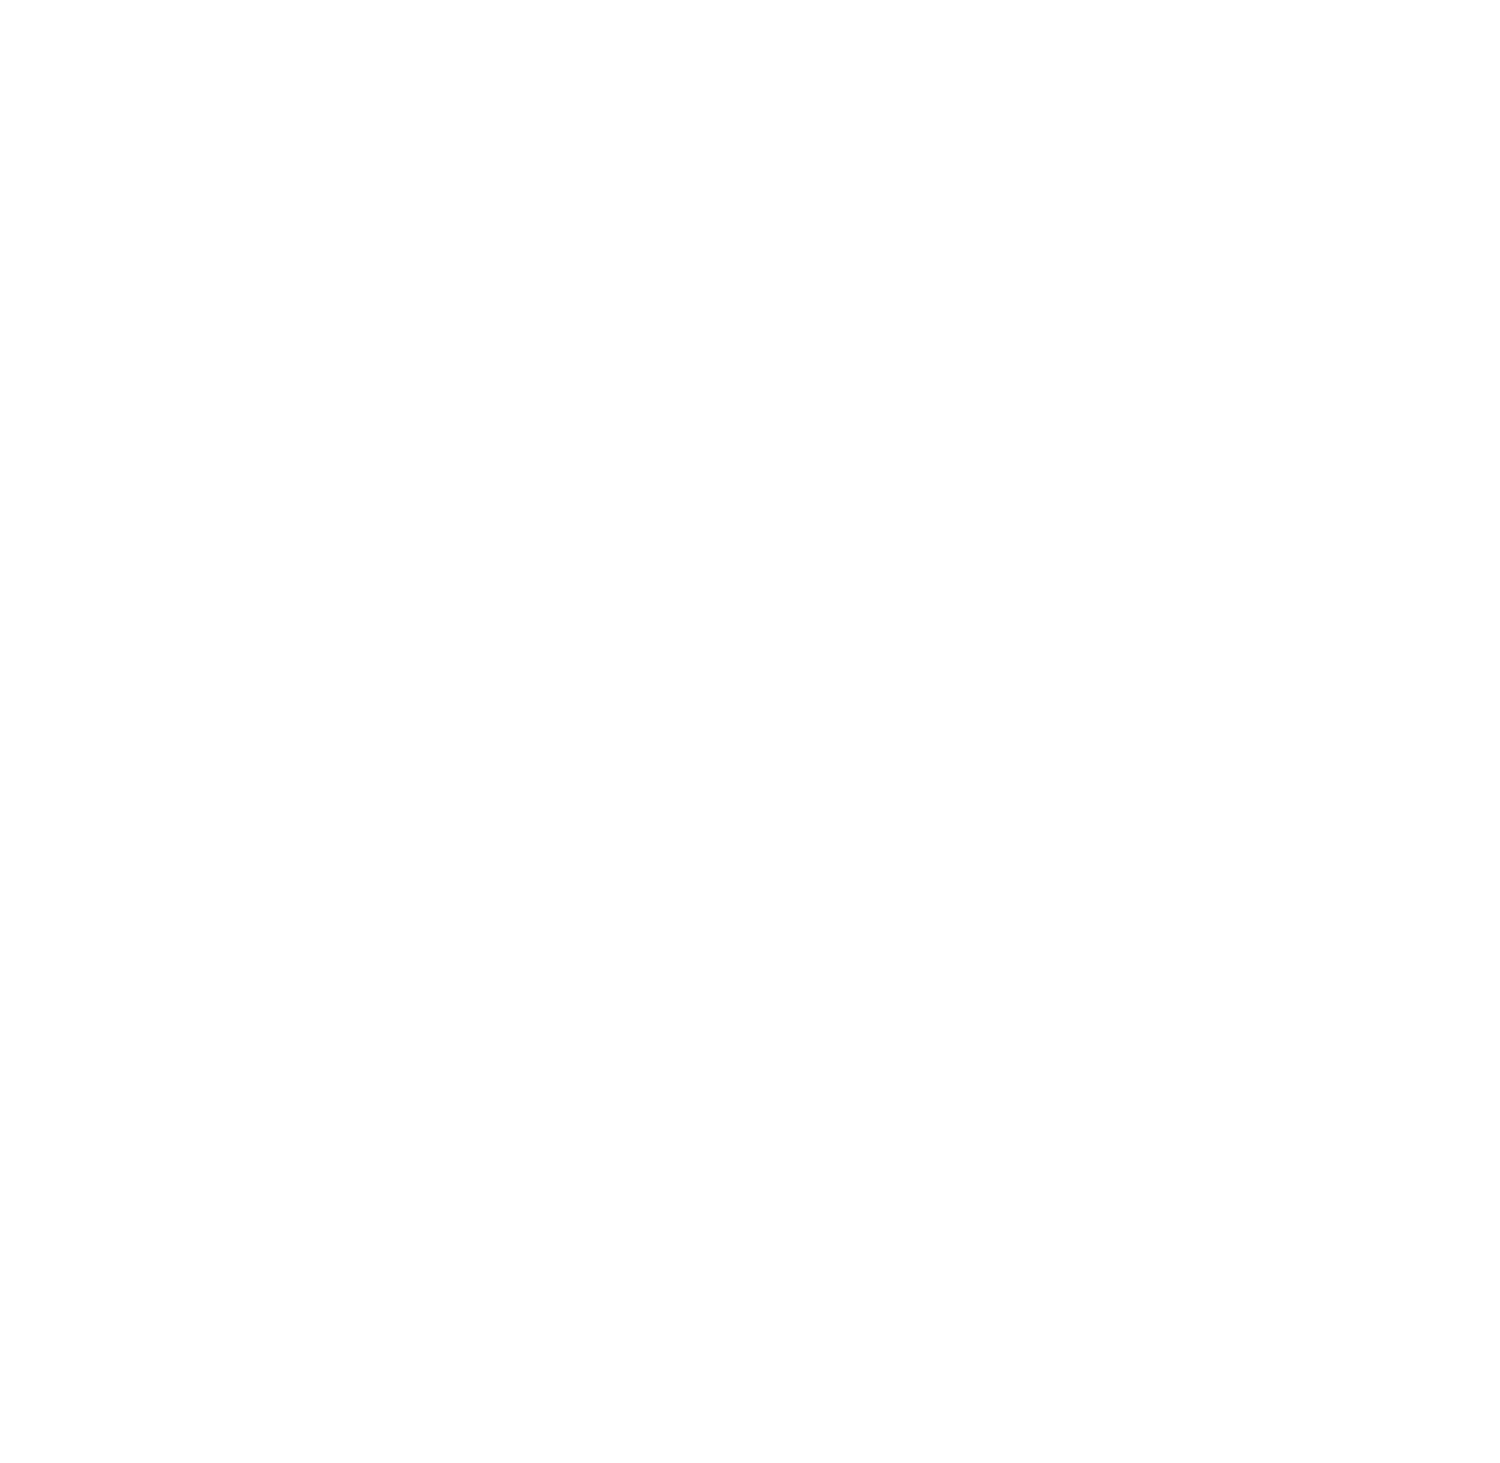 We Are Unity